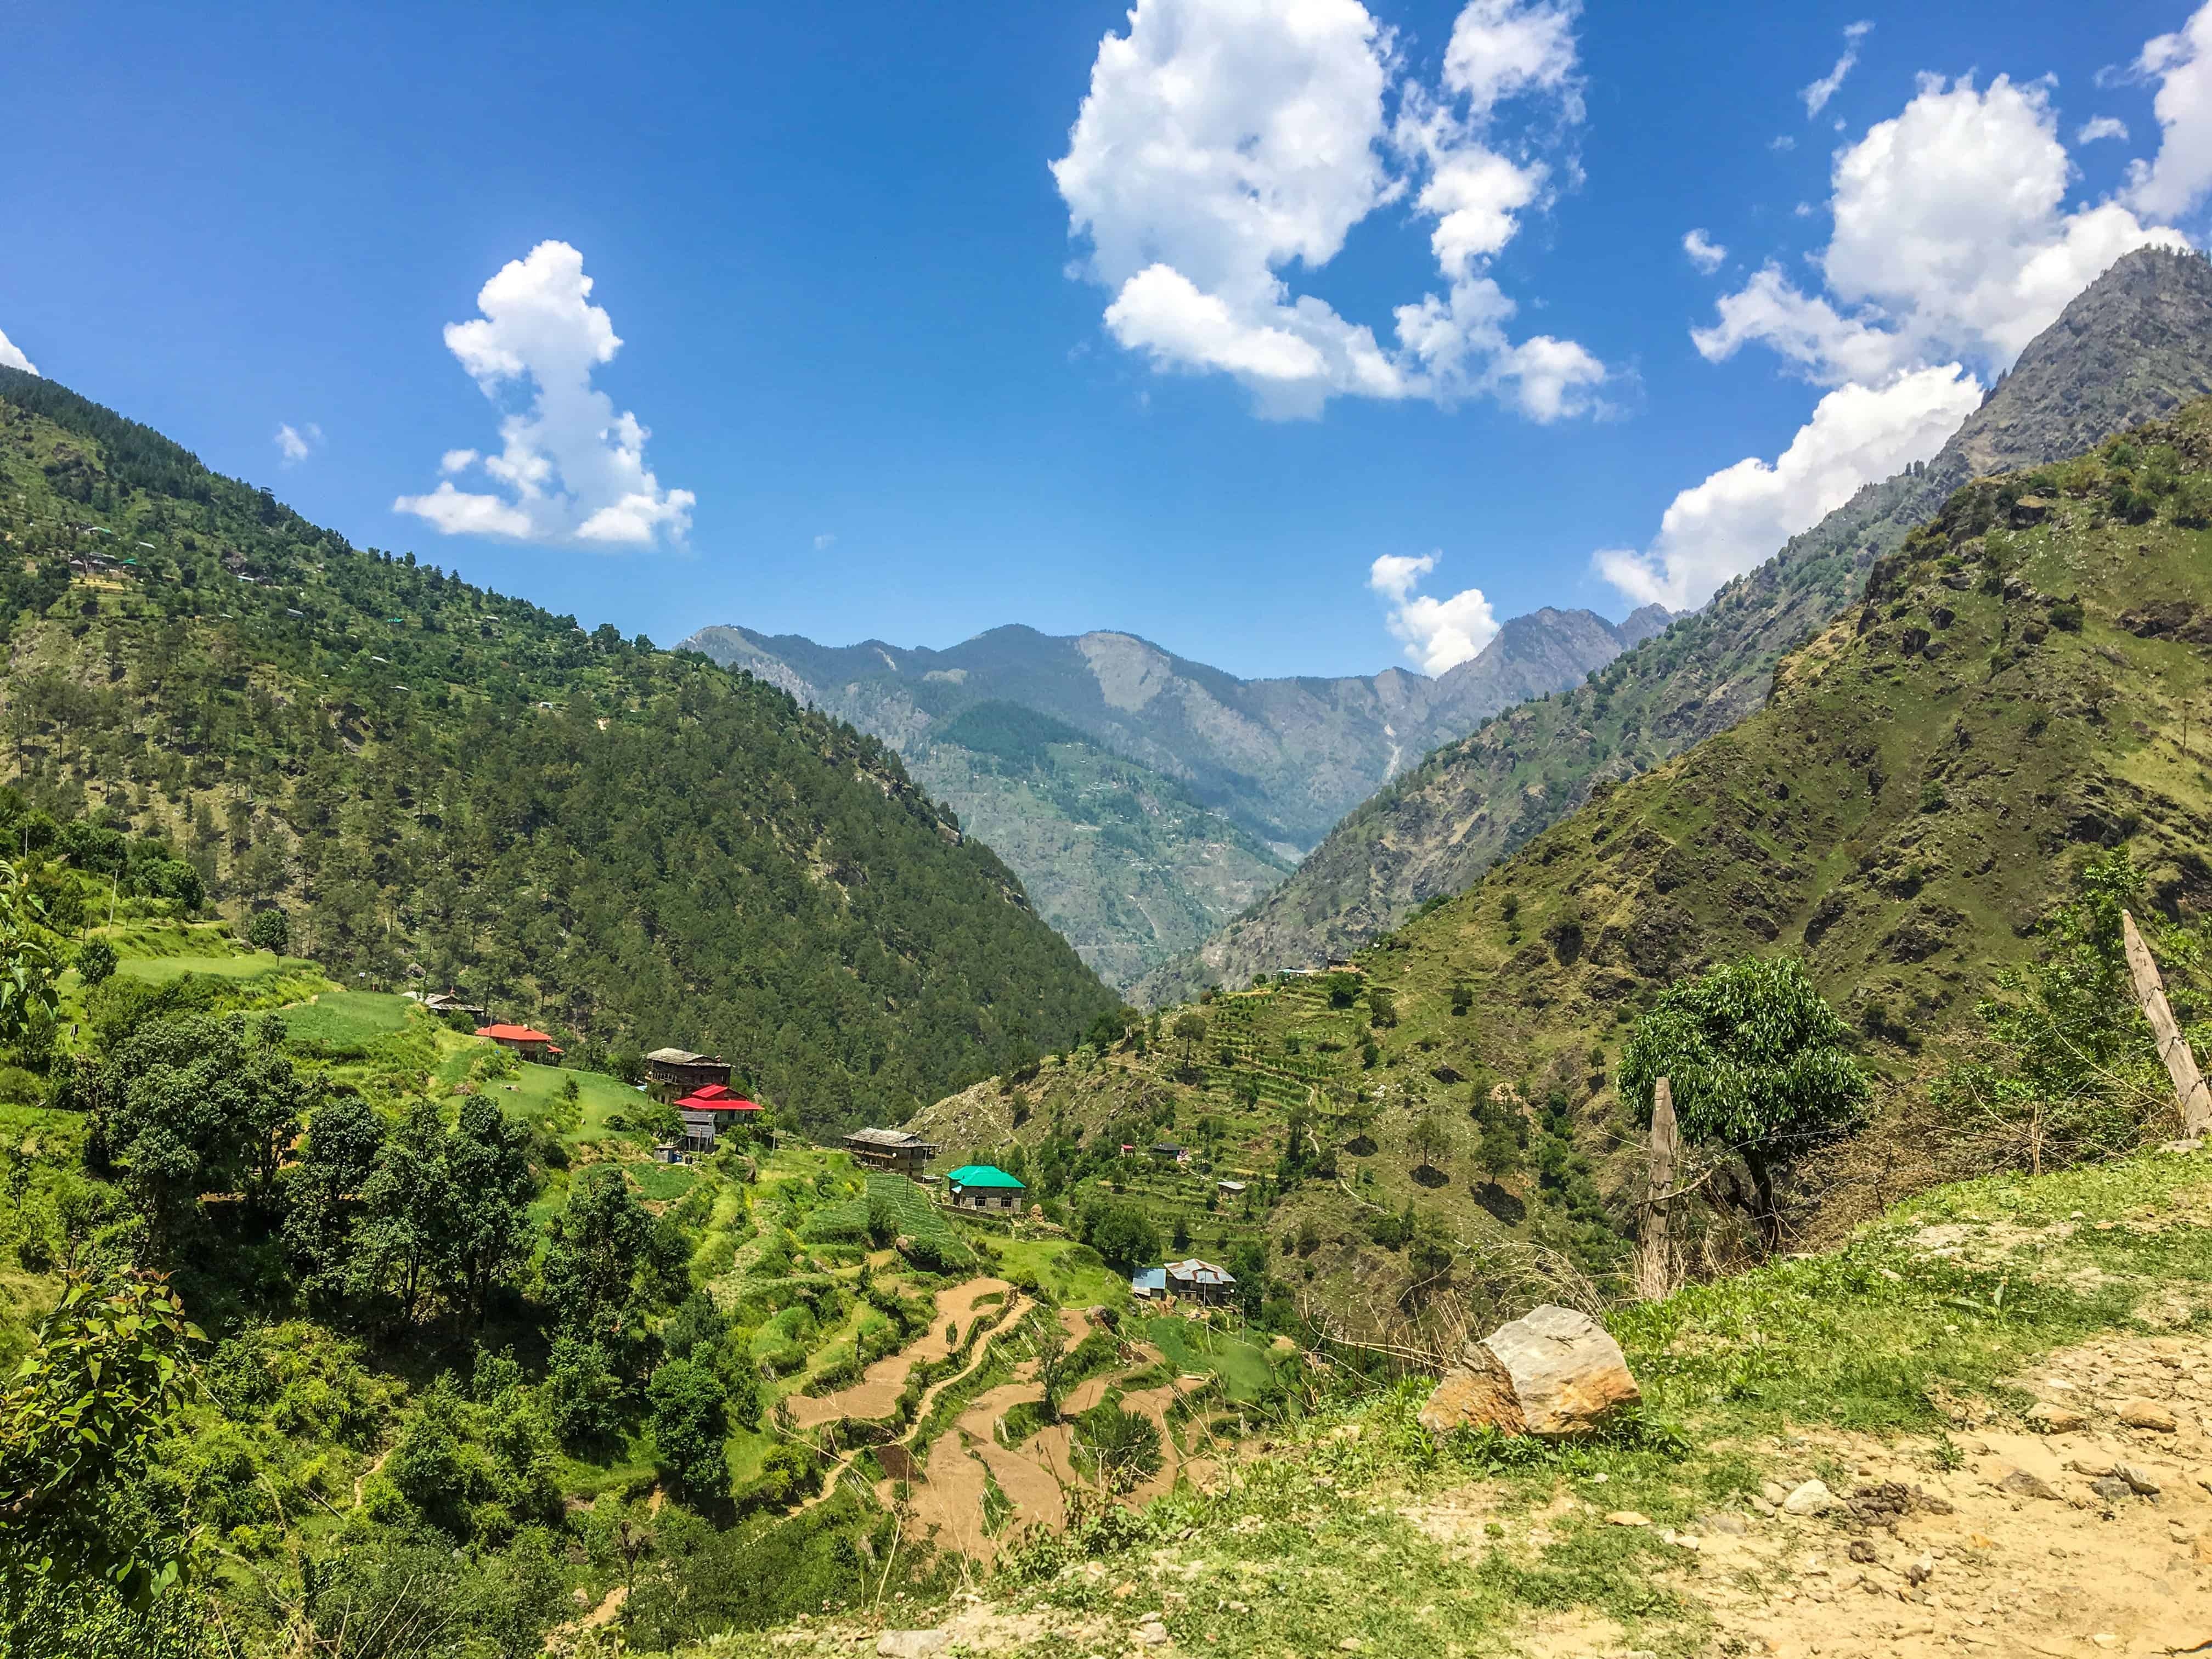 The valley dotted with colourful Himachali houses